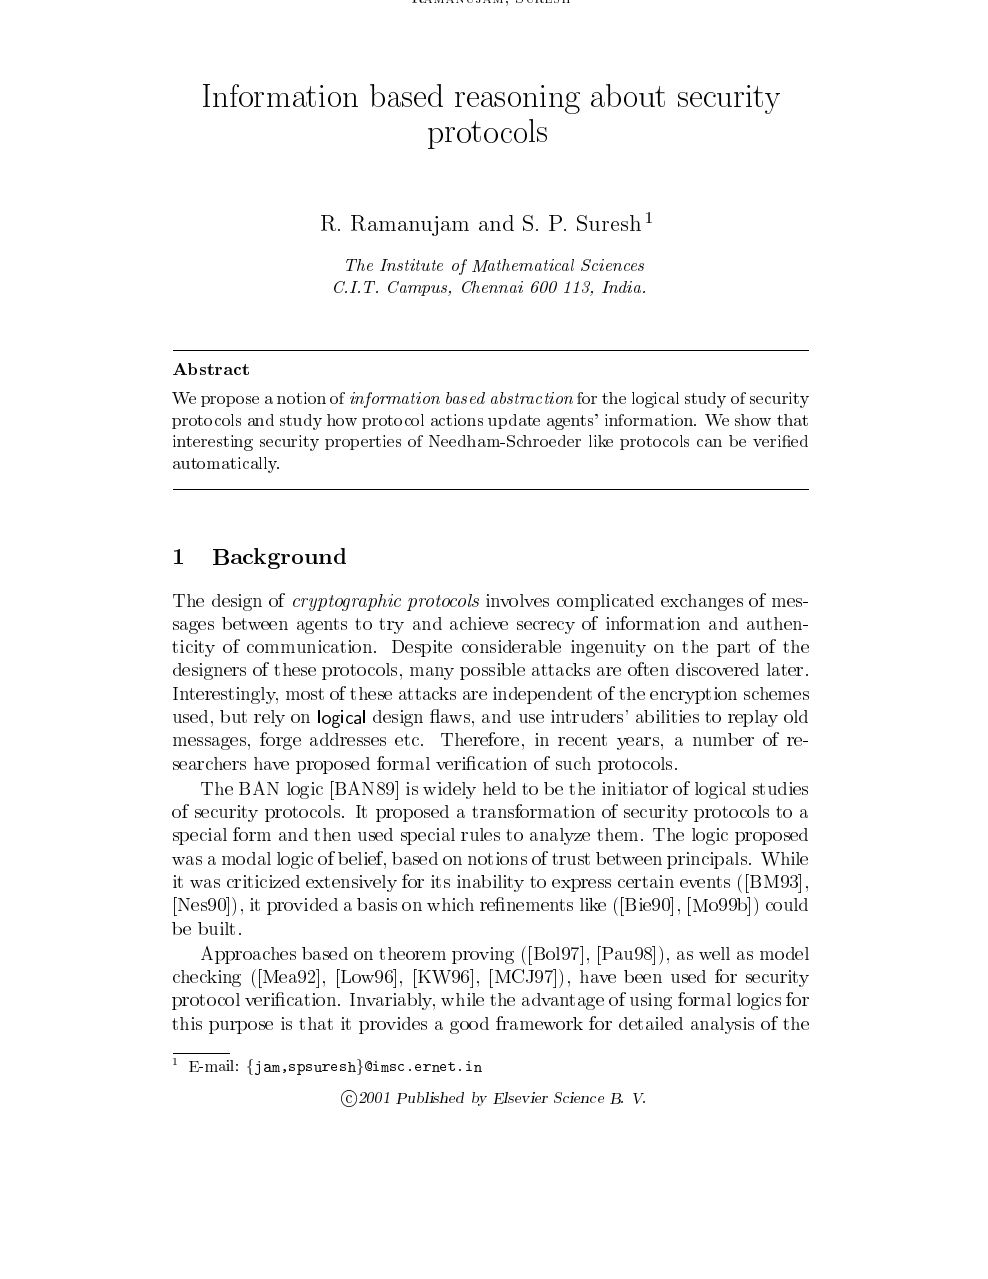 Information Based Reasoning About Security Protocols Topic Of Research Paper In Computer And Information Sciences Download Scholarly Article Pdf And Read For Free On Cyberleninka Open Science Hub